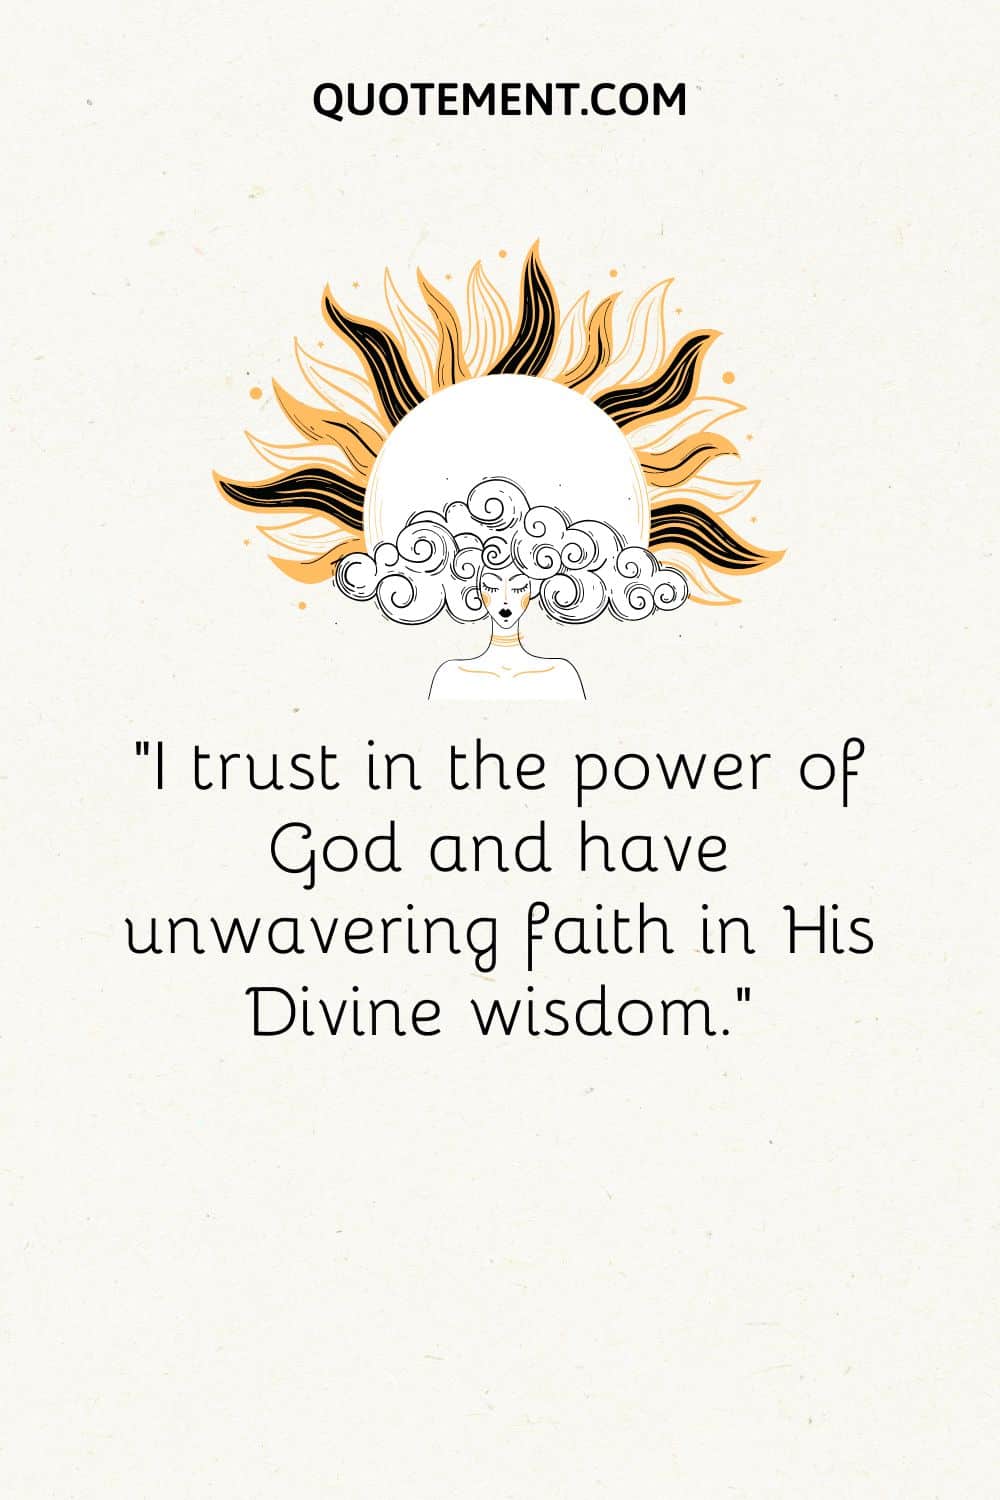 I trust in the power of God and have unwavering faith in His Divine wisdom